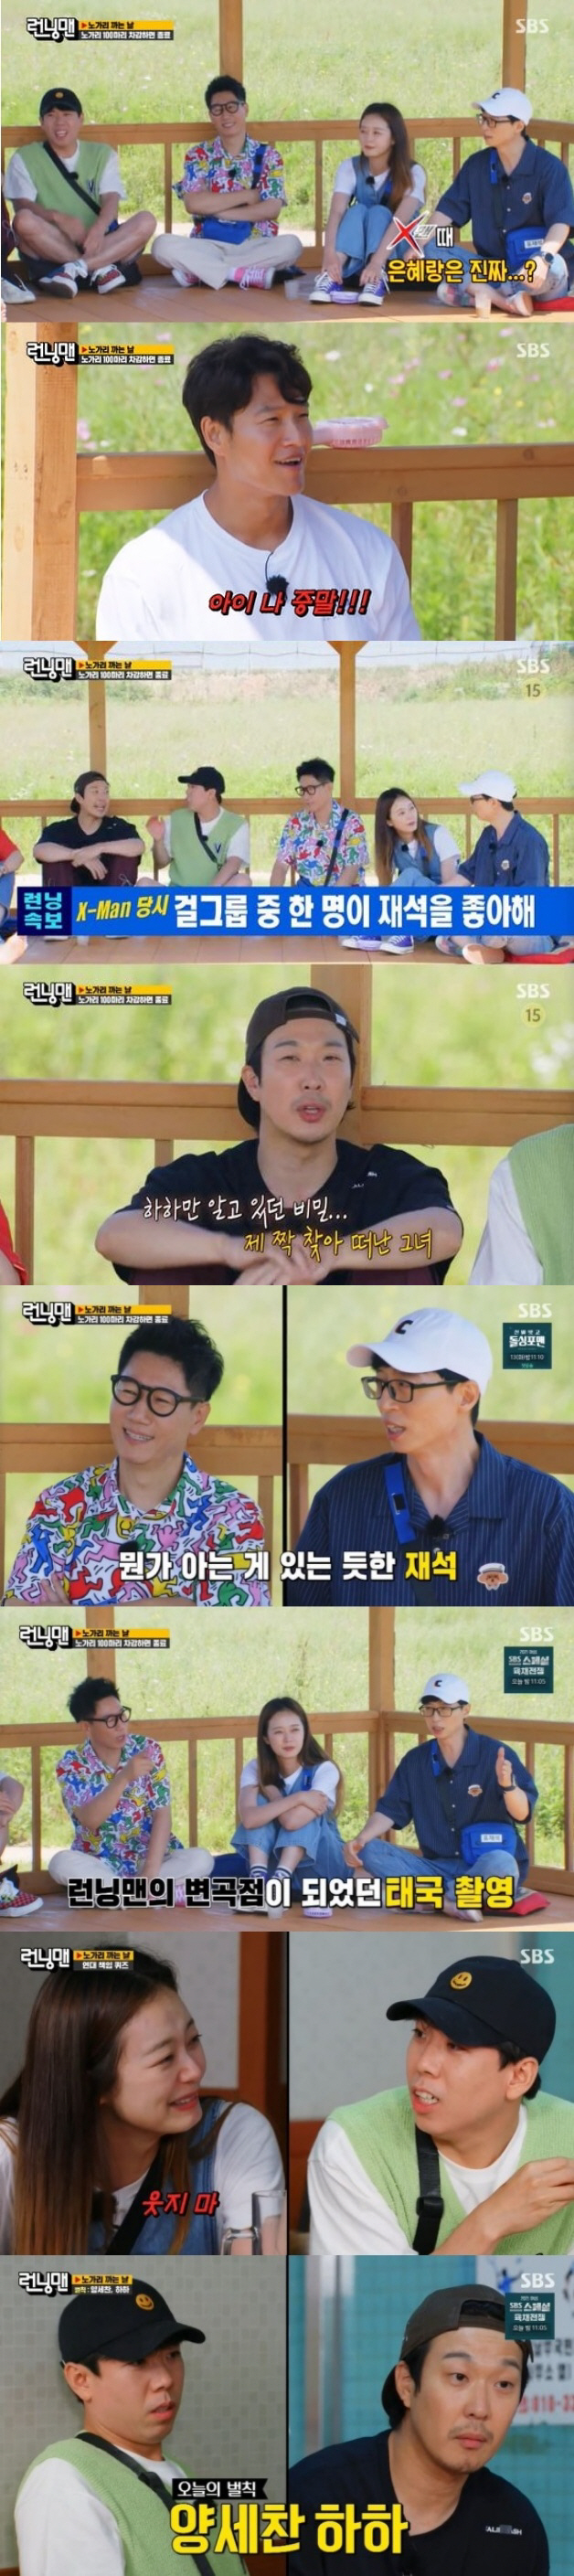 SBS Running Man created another legend with only the members talk.Running Man, which was broadcasted on the 4th, attracted attention with its new concept talk race We Gon Be Alright Day which can be done by constantly chatting.This race, which was created by reflecting the opinions of viewers that members can make a single episode with only talk, was really the Gods Hansu of the production team.We Gon Be Alright Day Race is a mission to deduct 100 We Gon Be Alrights, and We Gon Be Alright can be deducted if you chat without silence for 10 minutes.If you hang up for more than 10 seconds, two We Gon Be Alright will be added. The members poured out the talk bomb from the beginning and were interested in various behind-the-scenes talk that could not be heard anywhere.Haha recalled his days as X-Men and revealed that one of the girl groups liked Yoo Jae-Suk.Yoo Jae-Suk said, I have never received a dash, but Kim Jong Kook said, It is a straight image now, but there was a little bit of slap when I was kung-tung.Yoo Jae-Suk brought up the story that made up the members of the present at the early stage of Running Man planning.Yoo Jae-Suk said about Song Ji-hyo, When I came to the guest of a squash, I said, Ill be tired and go to rest.I was snoring in the next room, and because of that appearance, I was the first member candidate, he said, Ji Suk-jin was careful because I was close.I remember that the production team asked me for my opinion and talked as objectively and coolly as possible. Song Ji-hyo referred to Lee Kwang-soo during his early days of Running Man.Song Ji-hyo said, I was a woman, so I could not easily get along with my brothers in the early days, but Lee Kwang-soo called me a few times saying Lets see together.At that time, I thought a little I am so excited and said, Do not call me.In addition, Jeon So-min started his special Love Talk and recently surprised everyone by mentioning Thumbnam and saying that he was Yong-nam.I was active, so I asked him to walk home together. I walked too long. I said go sister at the stop.The members made a lot of the past class with the talk that made the production team tired, and Yang Se-chan and Haha were decided as the final penalties.The scene had the highest audience rating of 8.1% per minute, accounting for the best one minute.